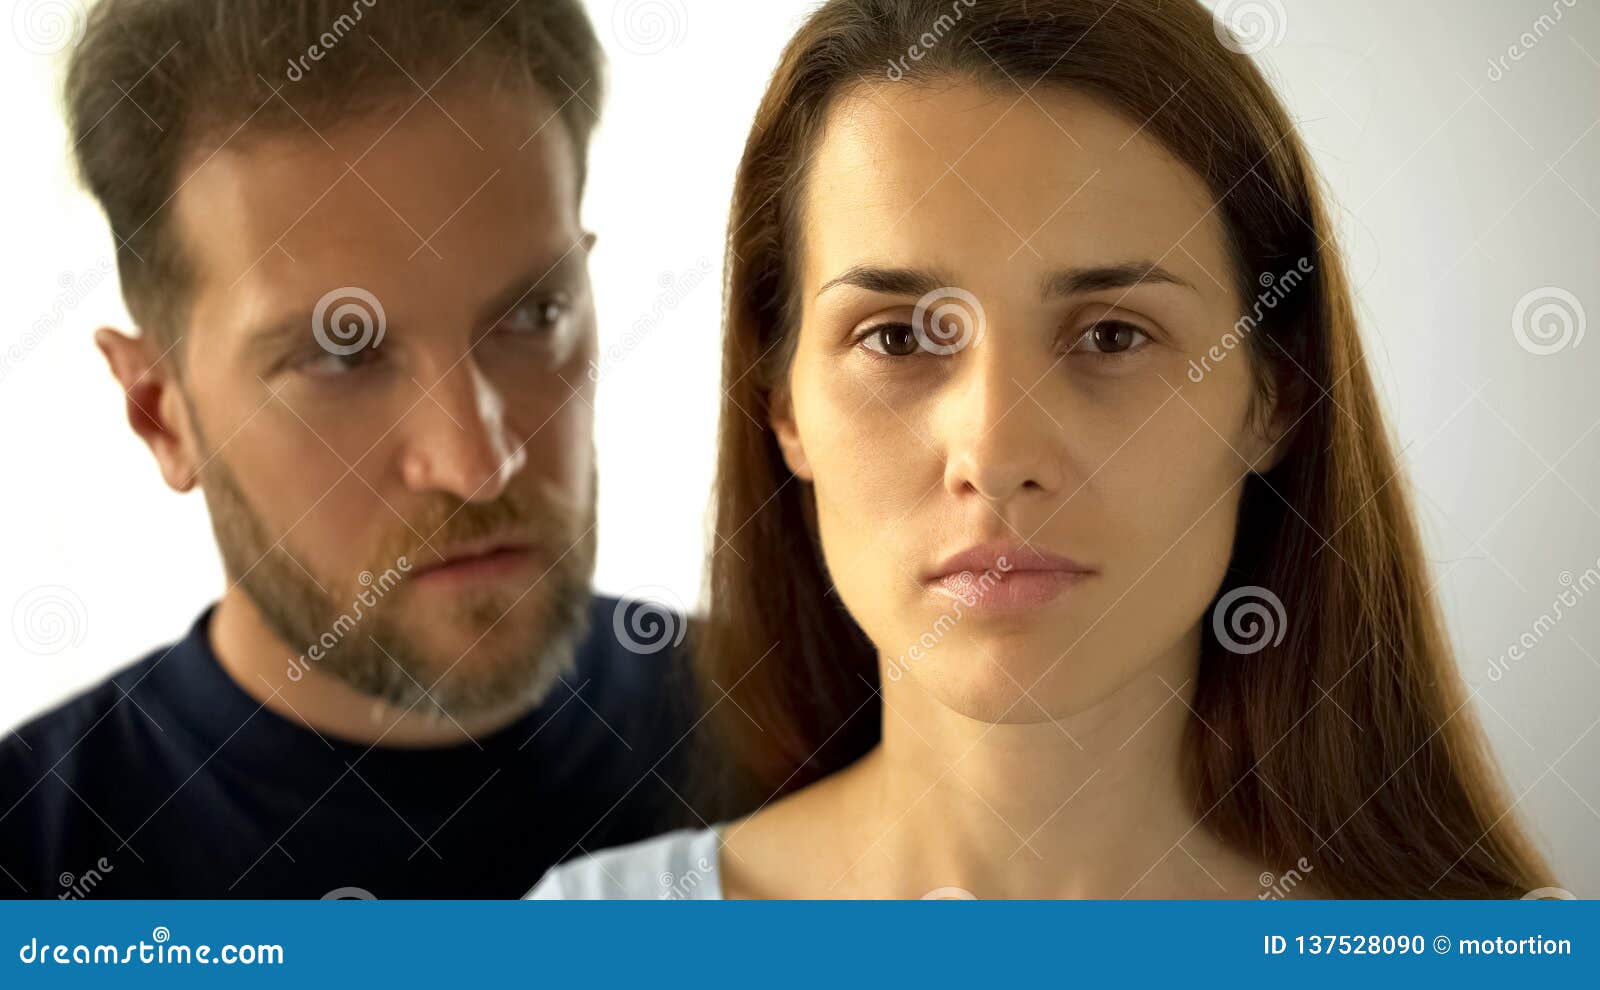 pensive woman looking at camera man behind wife, inability to make own decisions